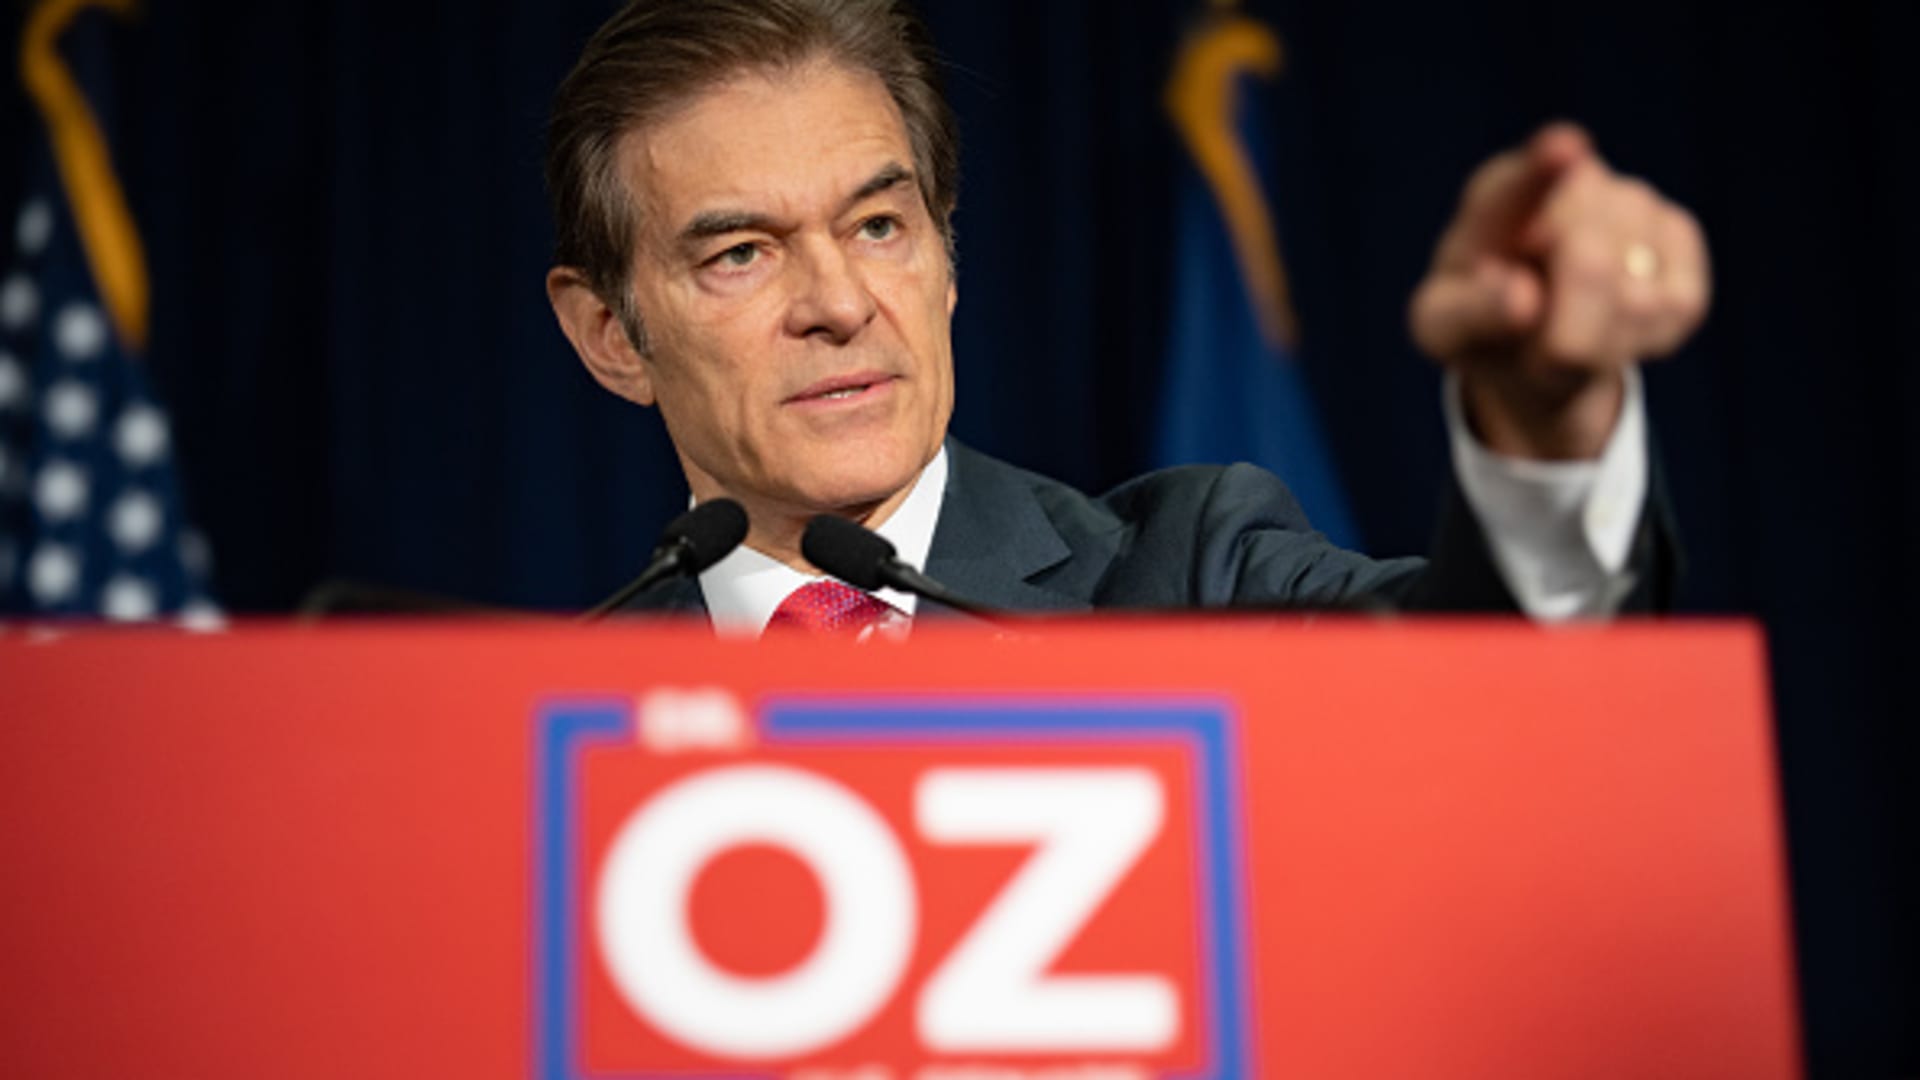 Dr.  Oz has ties to hydroxychloroquine companies as he supports Covid treatment